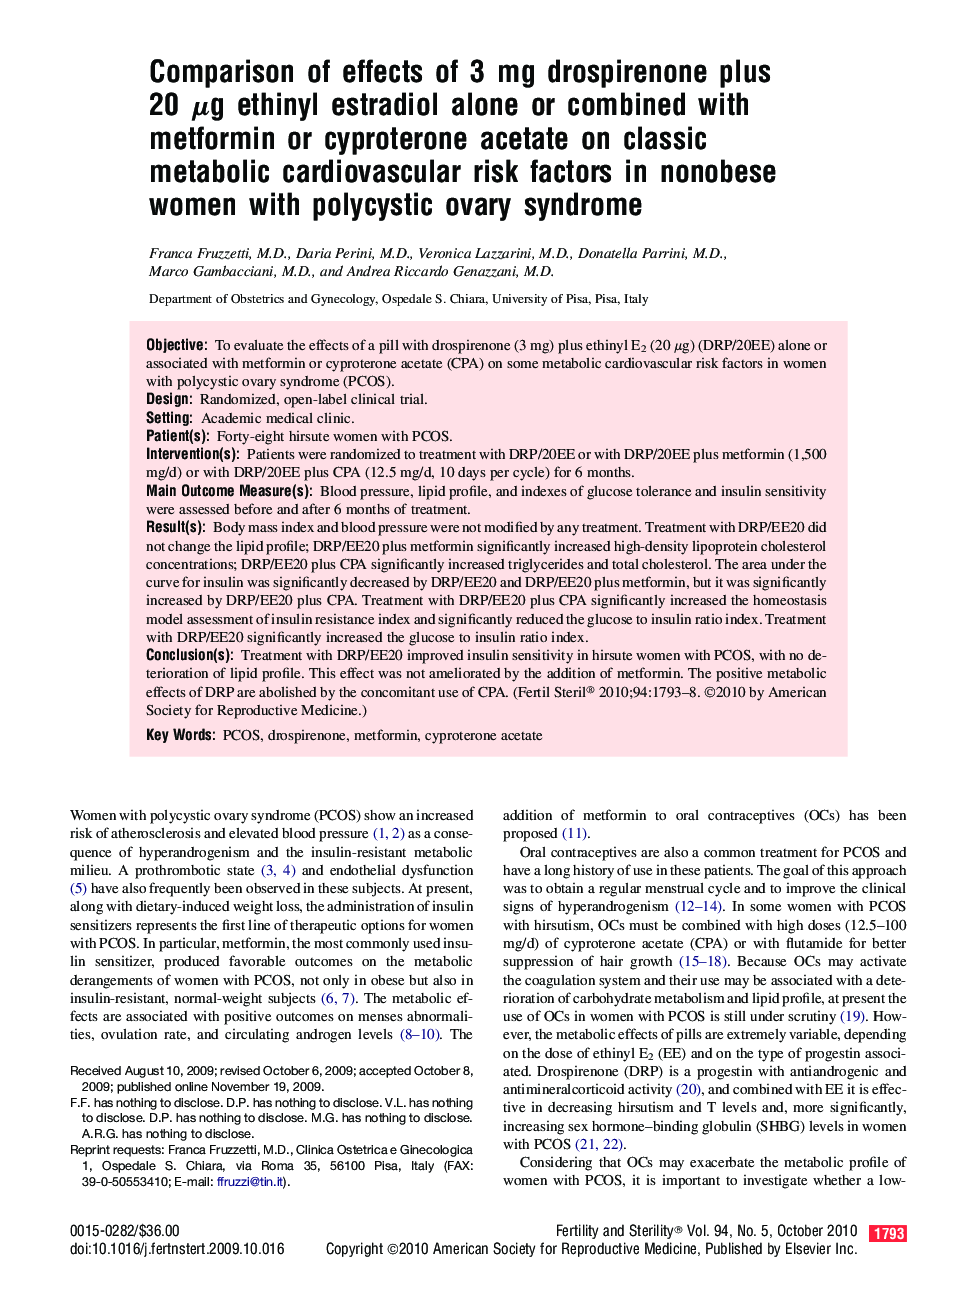 Comparison of effects of 3 mg drospirenone plus 20 μg ethinyl estradiol alone or combined with metformin or cyproterone acetate on classic metabolic cardiovascular risk factors in nonobese women with polycystic ovary syndrome 